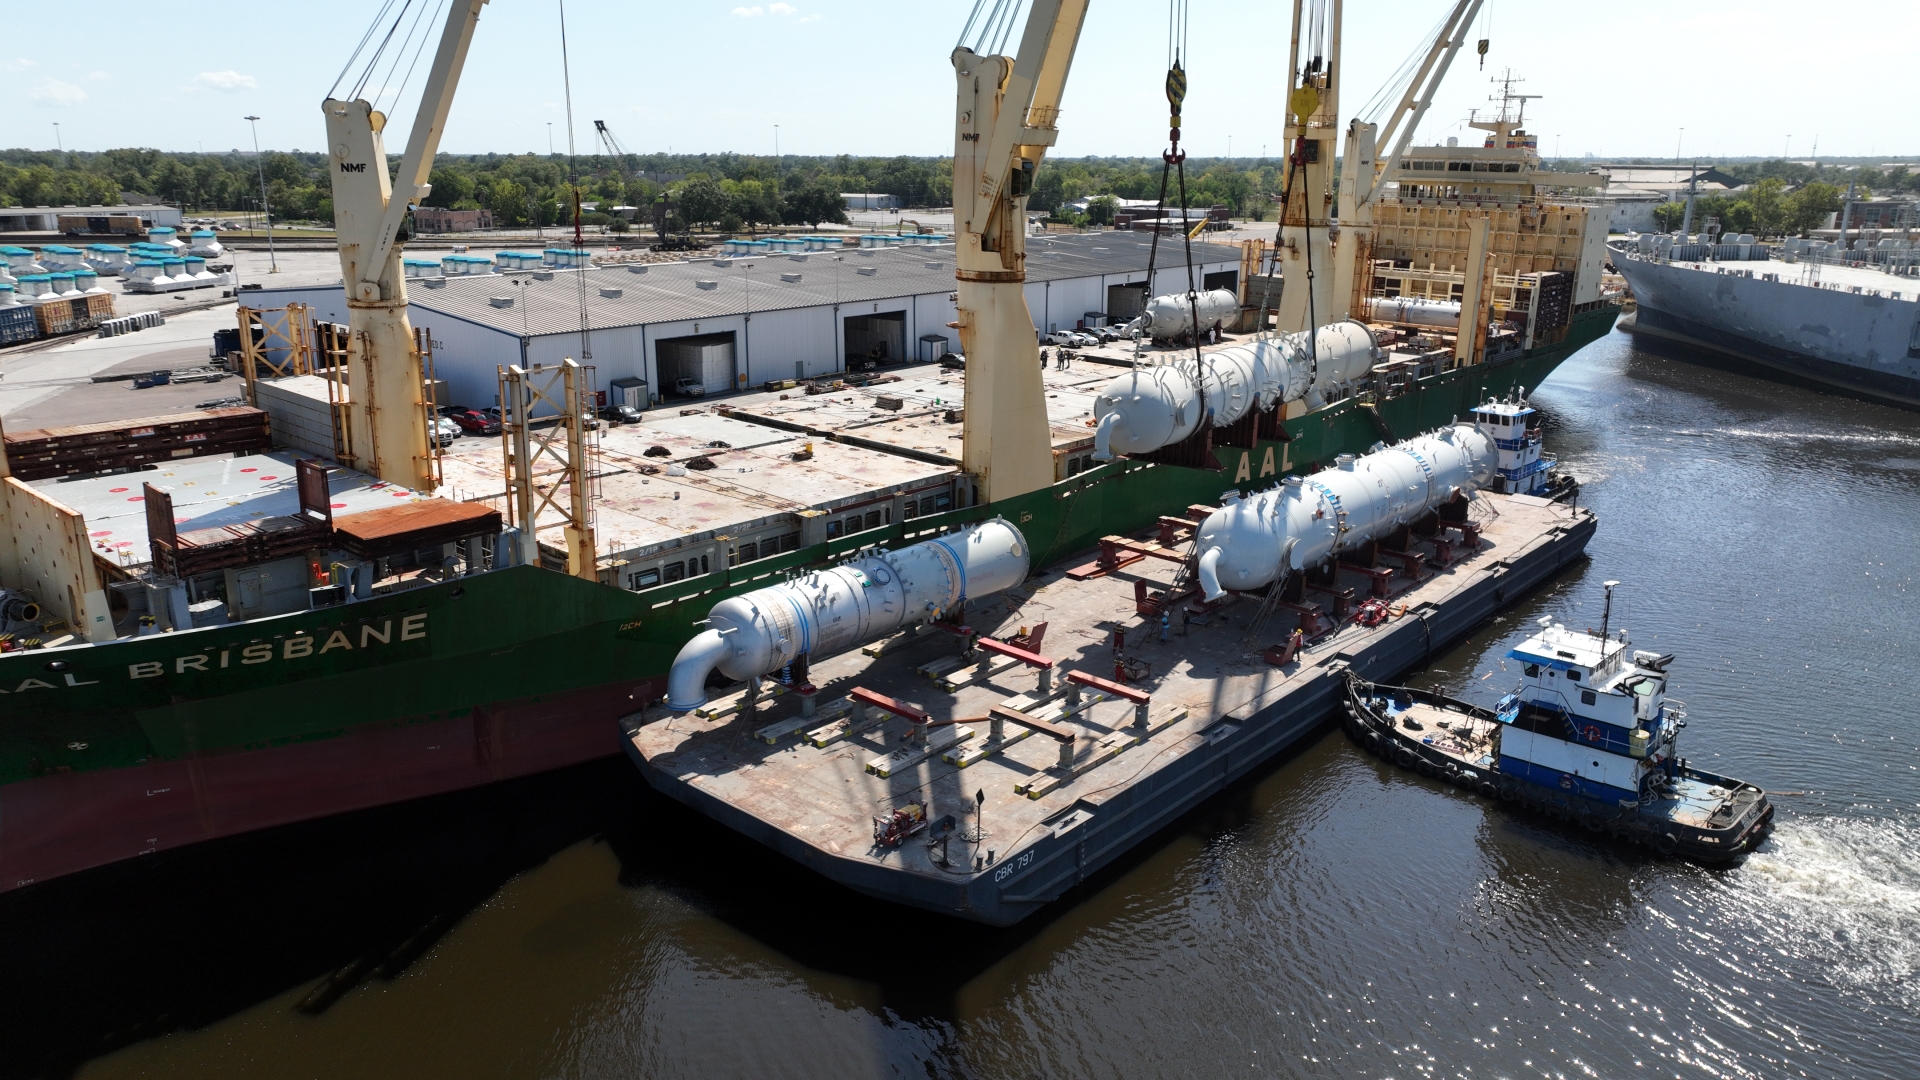 AAL Brisbane delivers 12,800 frt for an LNG project in Texas